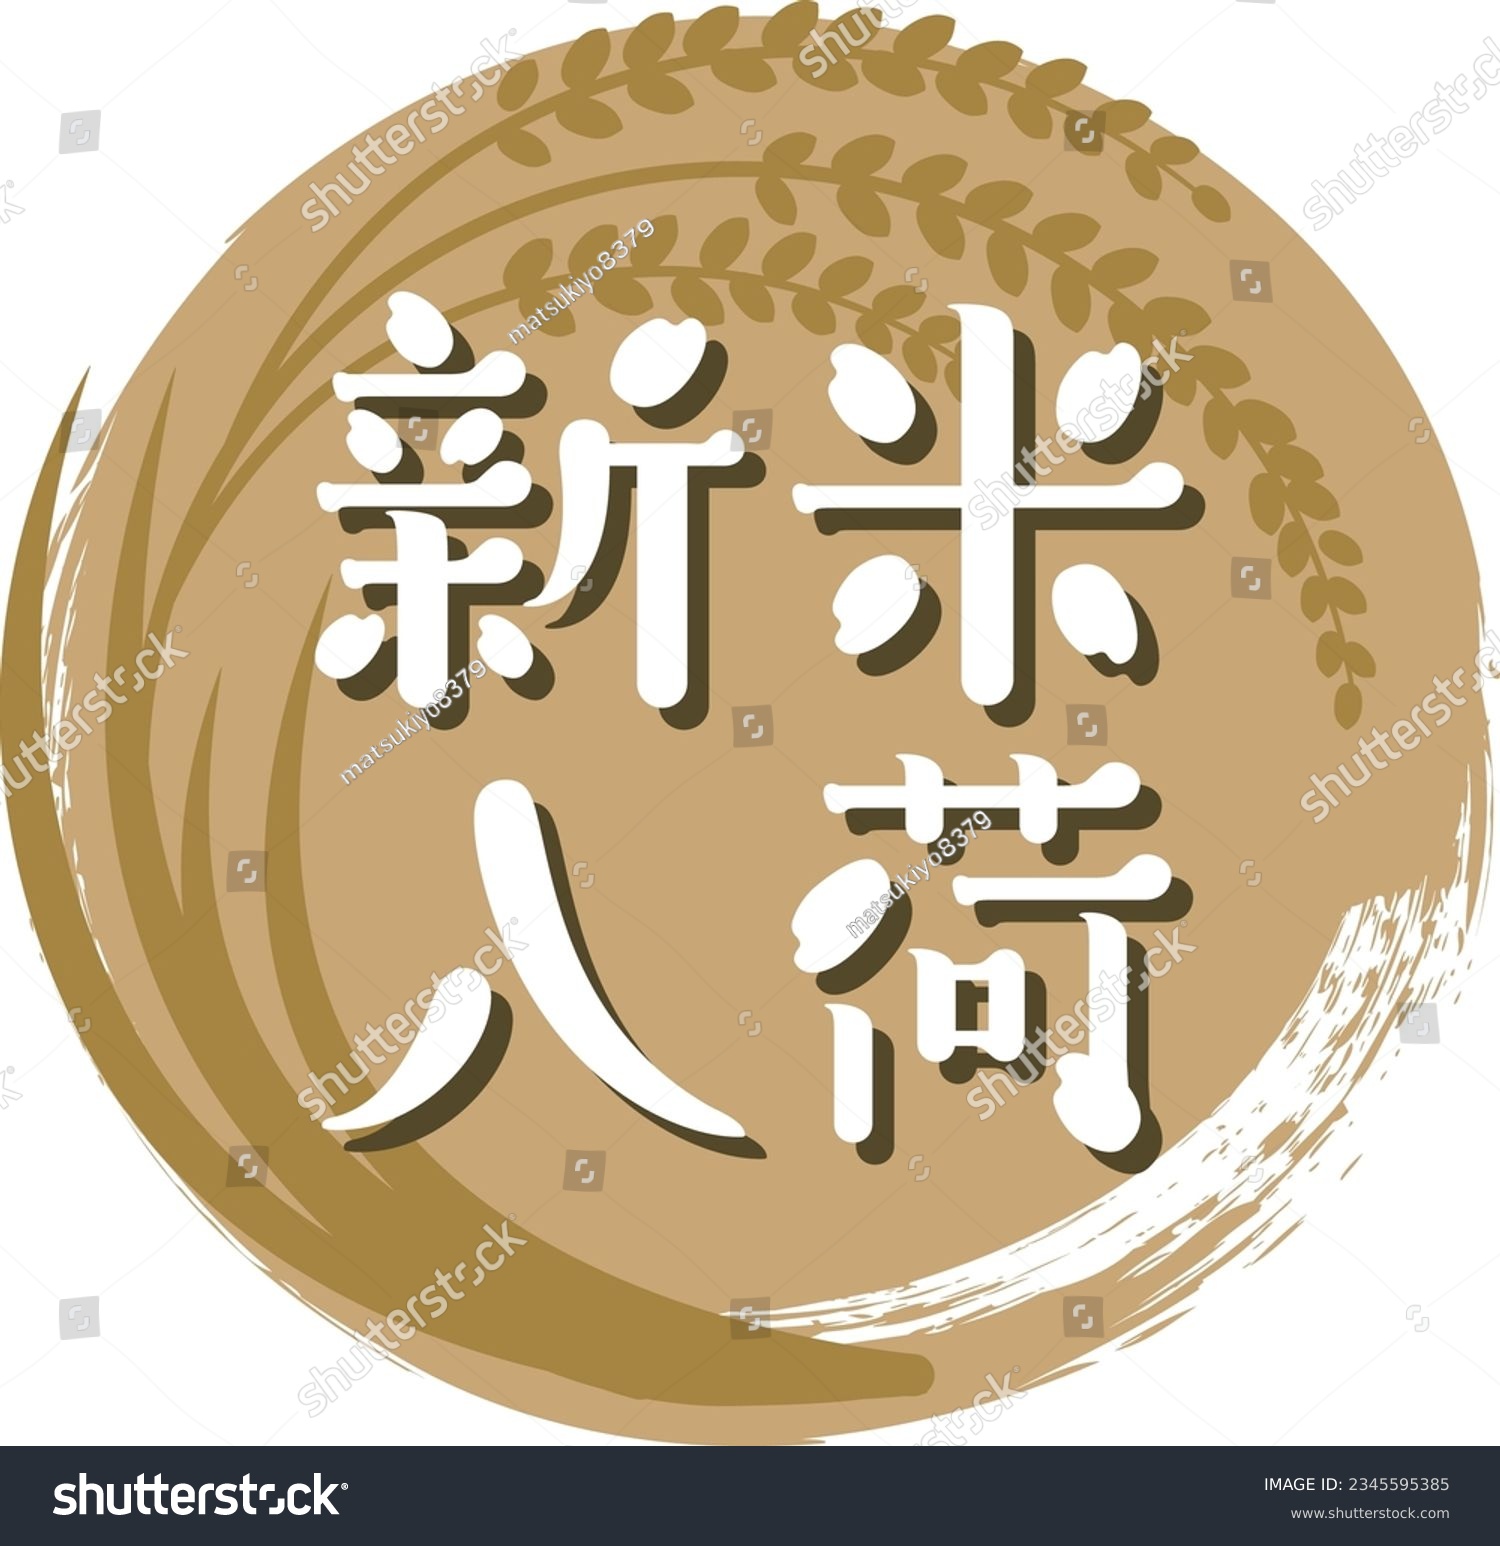 SVG of Ear of rice and arrival of new rice logo POP (circular)

There is a description in Japanese that says 